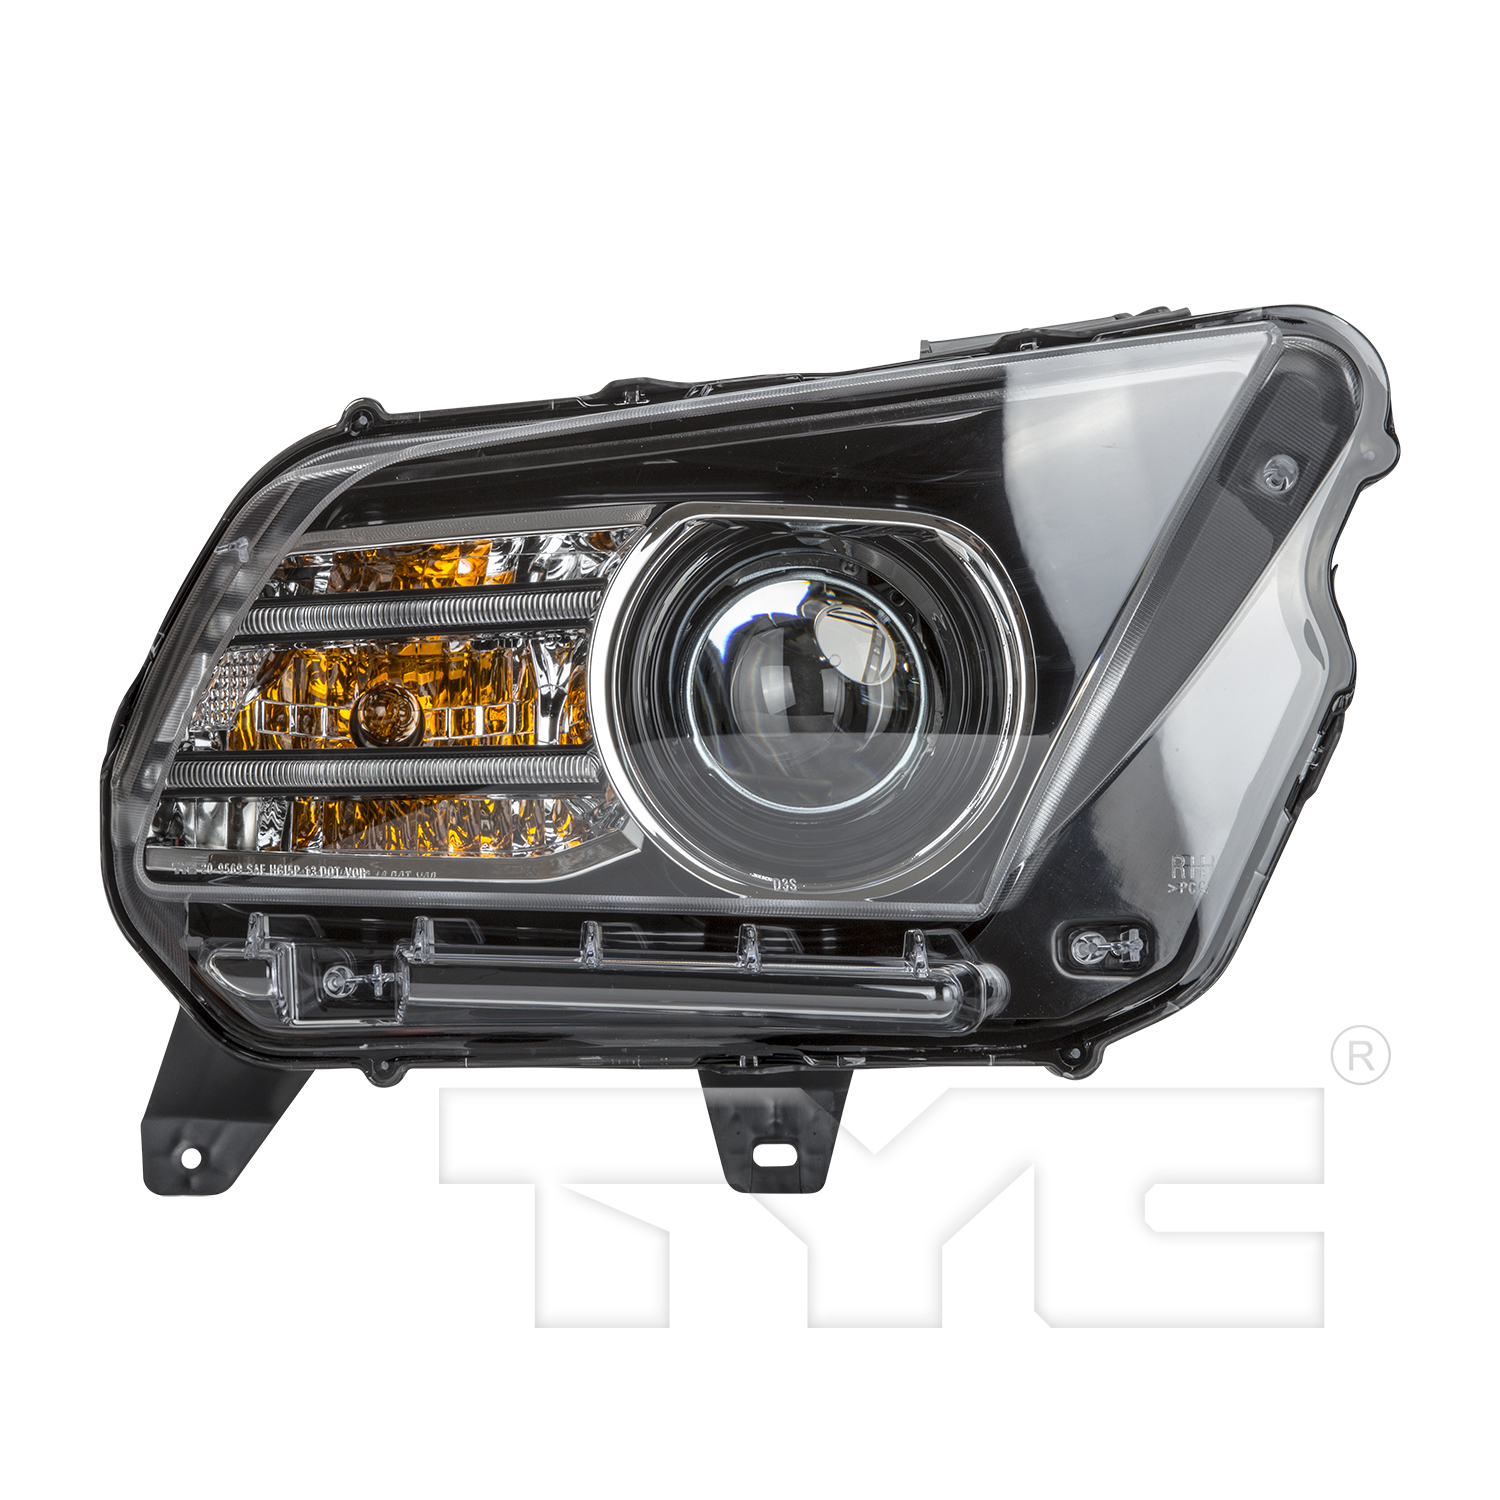 Aftermarket HEADLIGHTS for FORD - MUSTANG, MUSTANG,13-14,RT Headlamp lens/housing